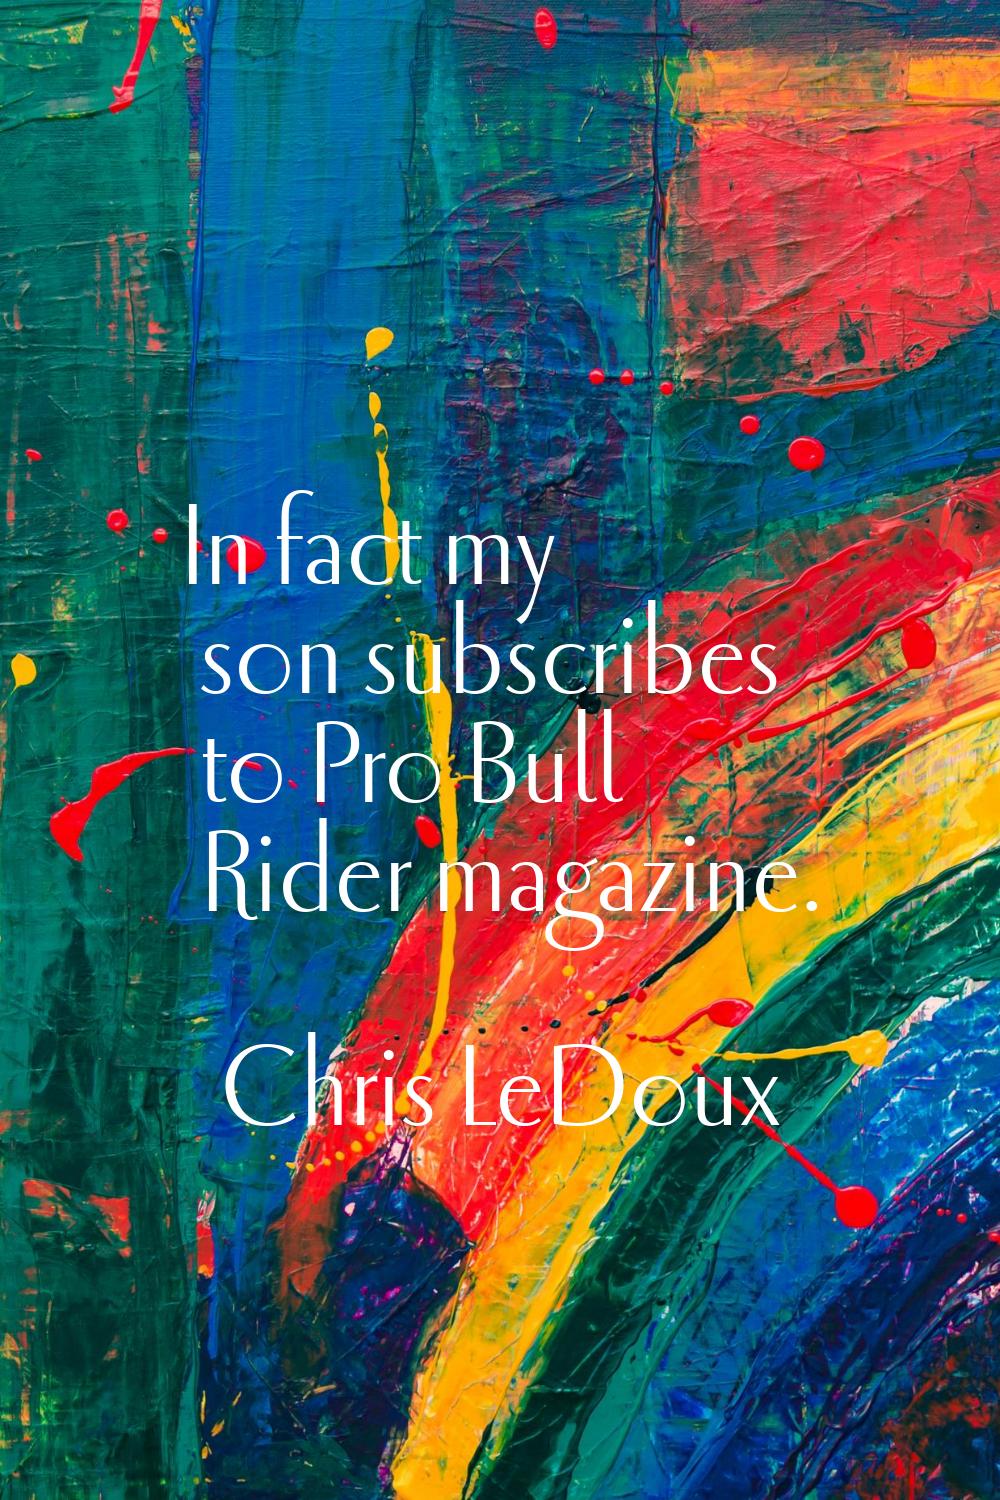 In fact my son subscribes to Pro Bull Rider magazine.